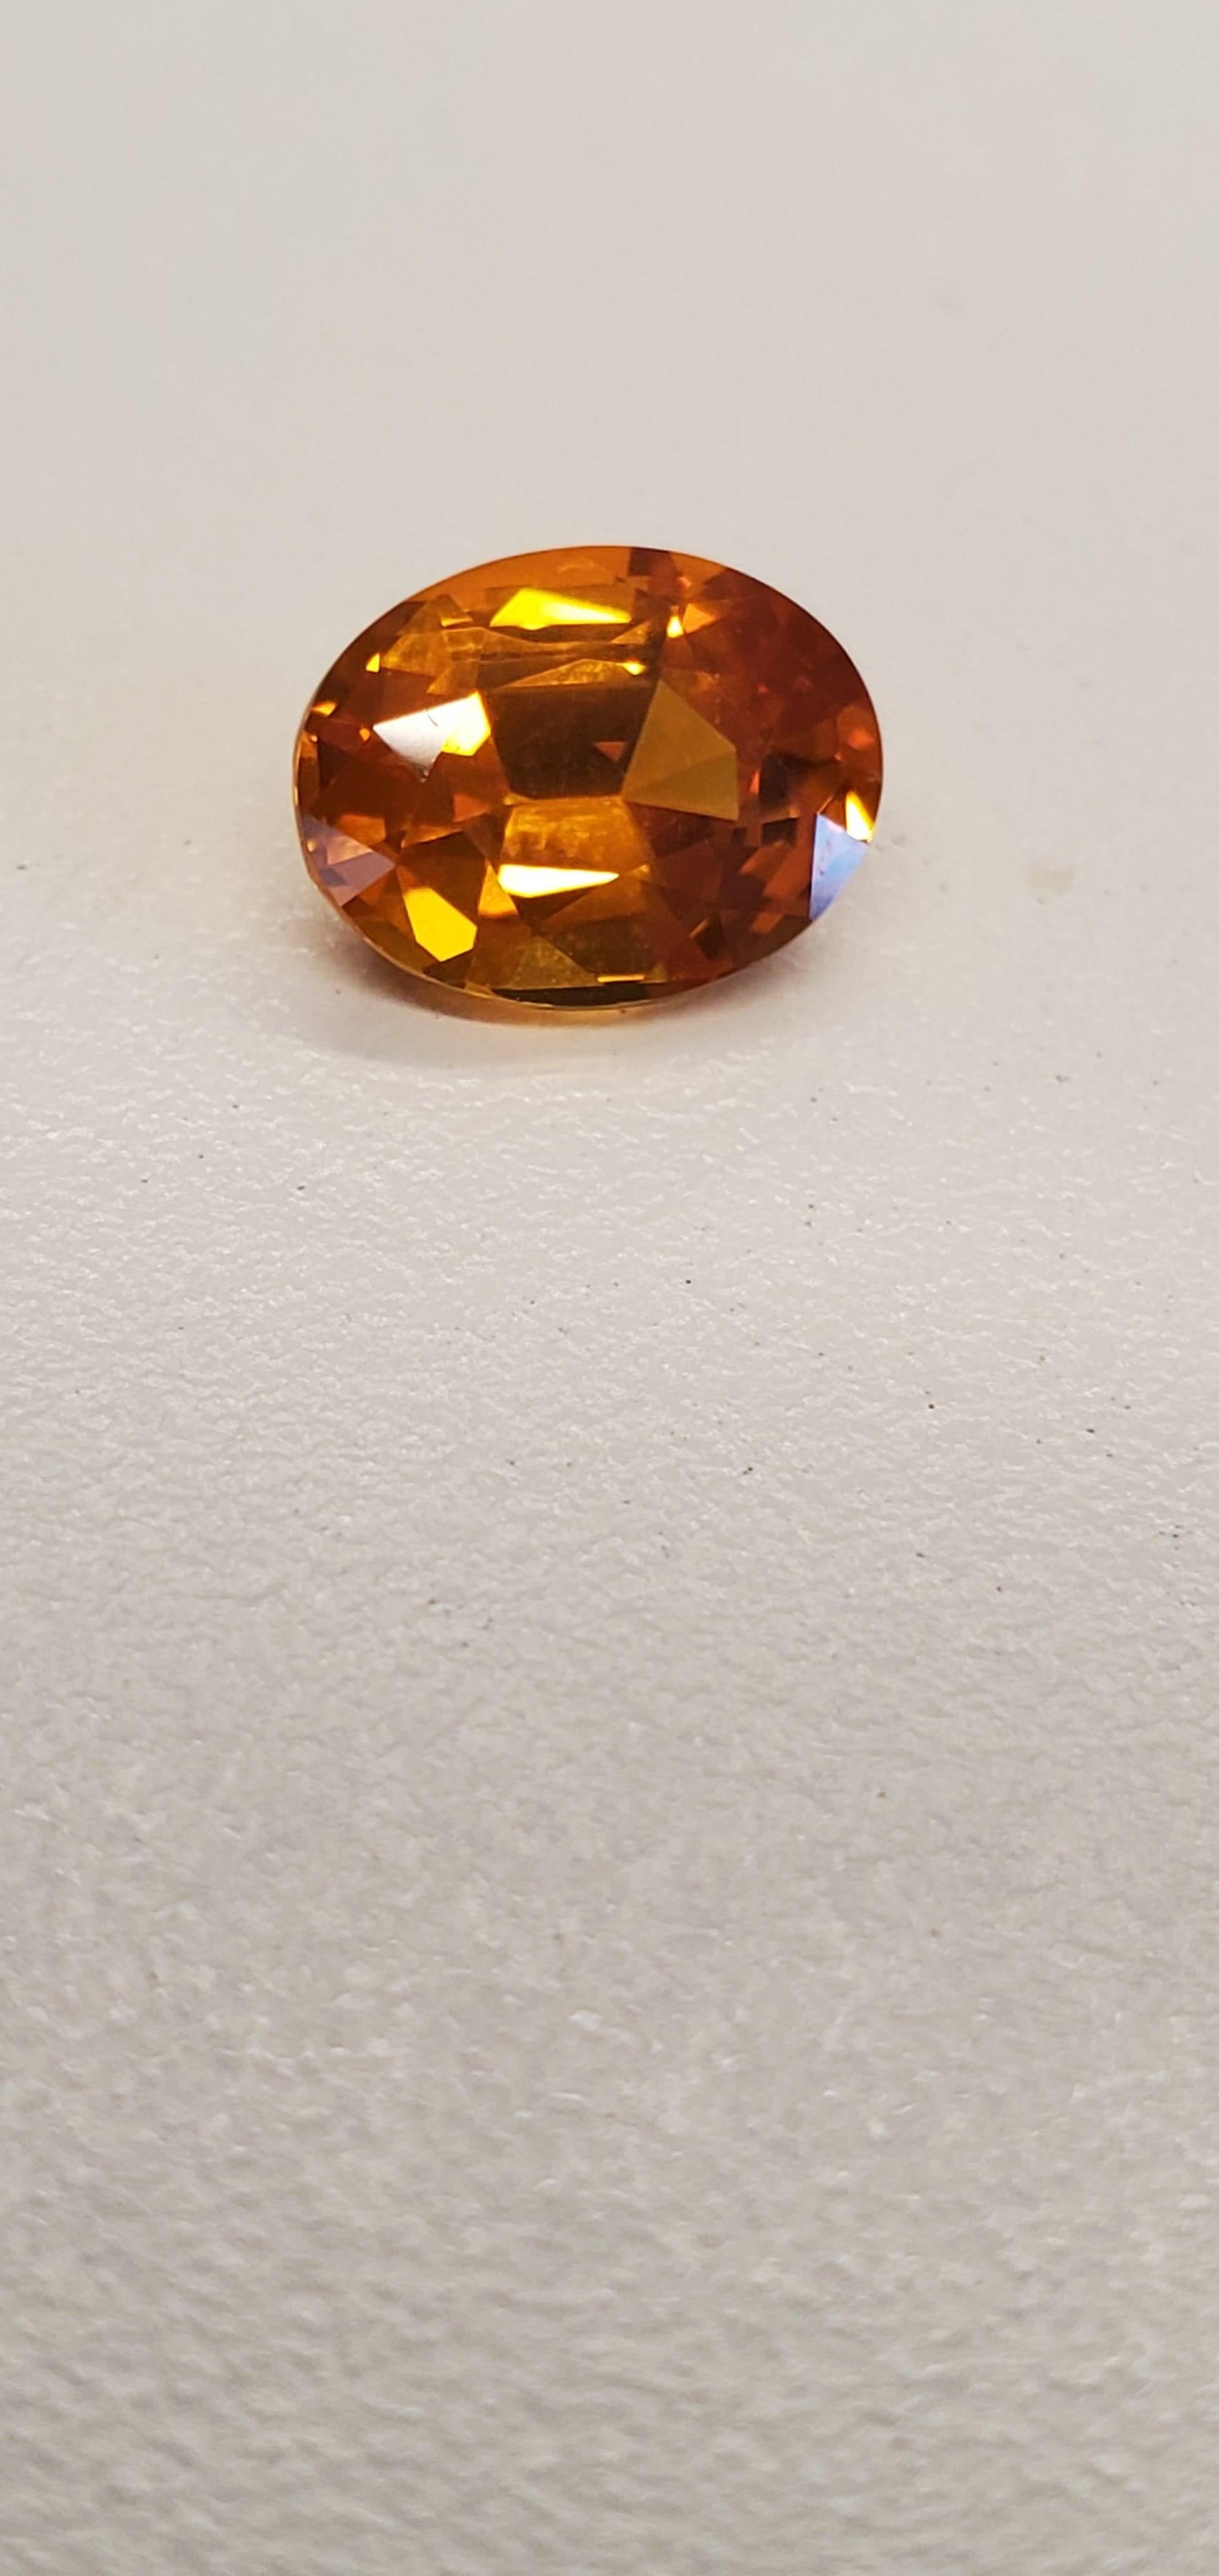 Orange sapphires are quite rare, and are some of the most difficult sapphires to find in a natural, unheated state. The color of most orange sapphires has a secondary tone of yellow as well. Intense orange sapphires that are untreated and naturally